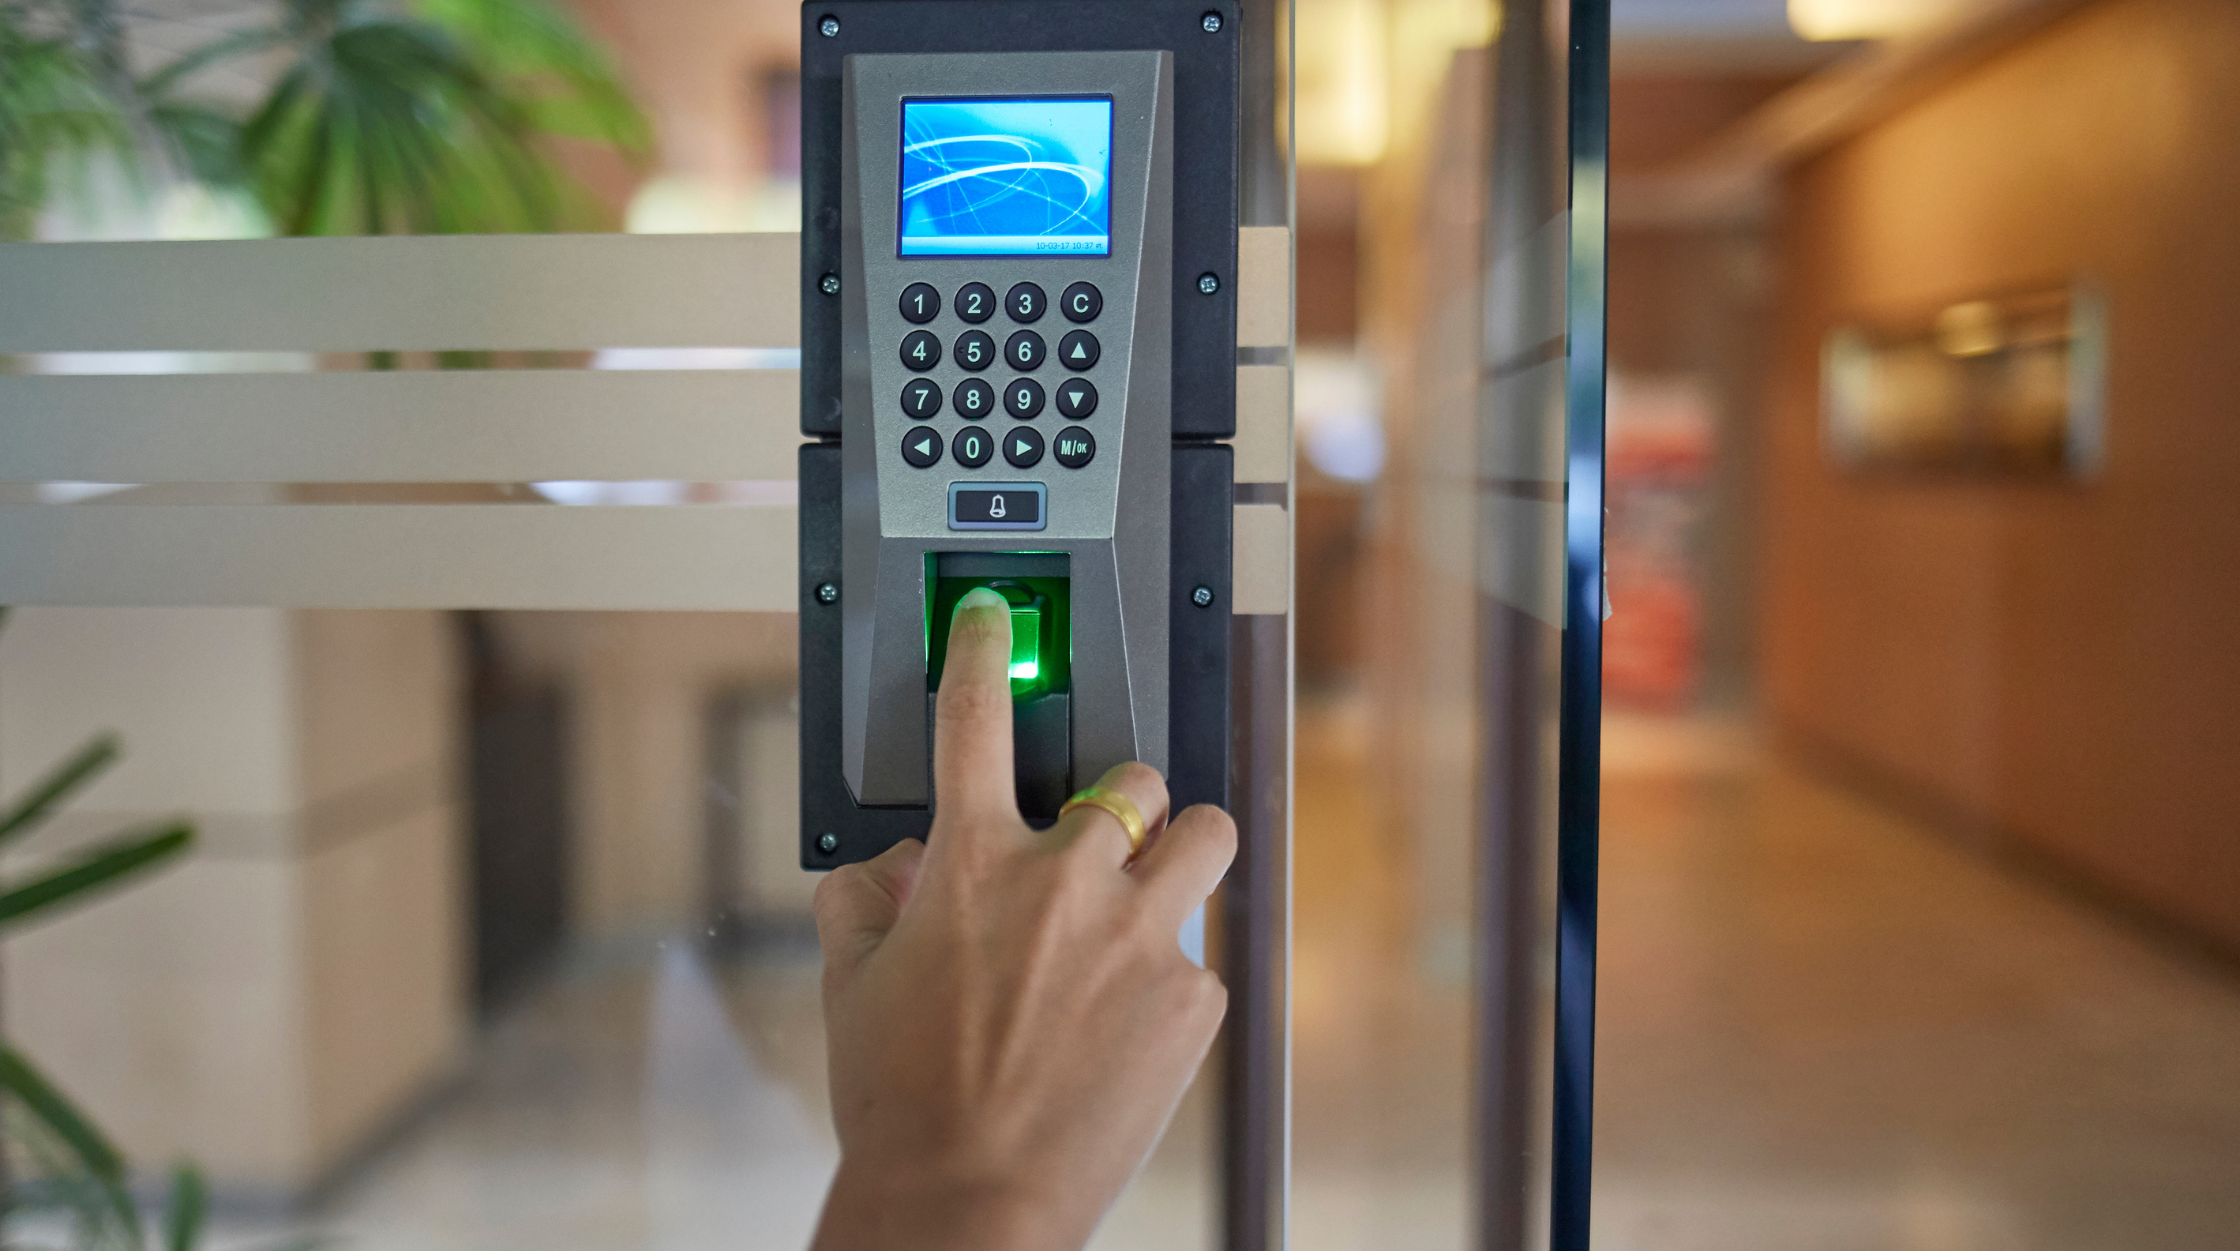 An active security door controlling device attached on a slider glass door